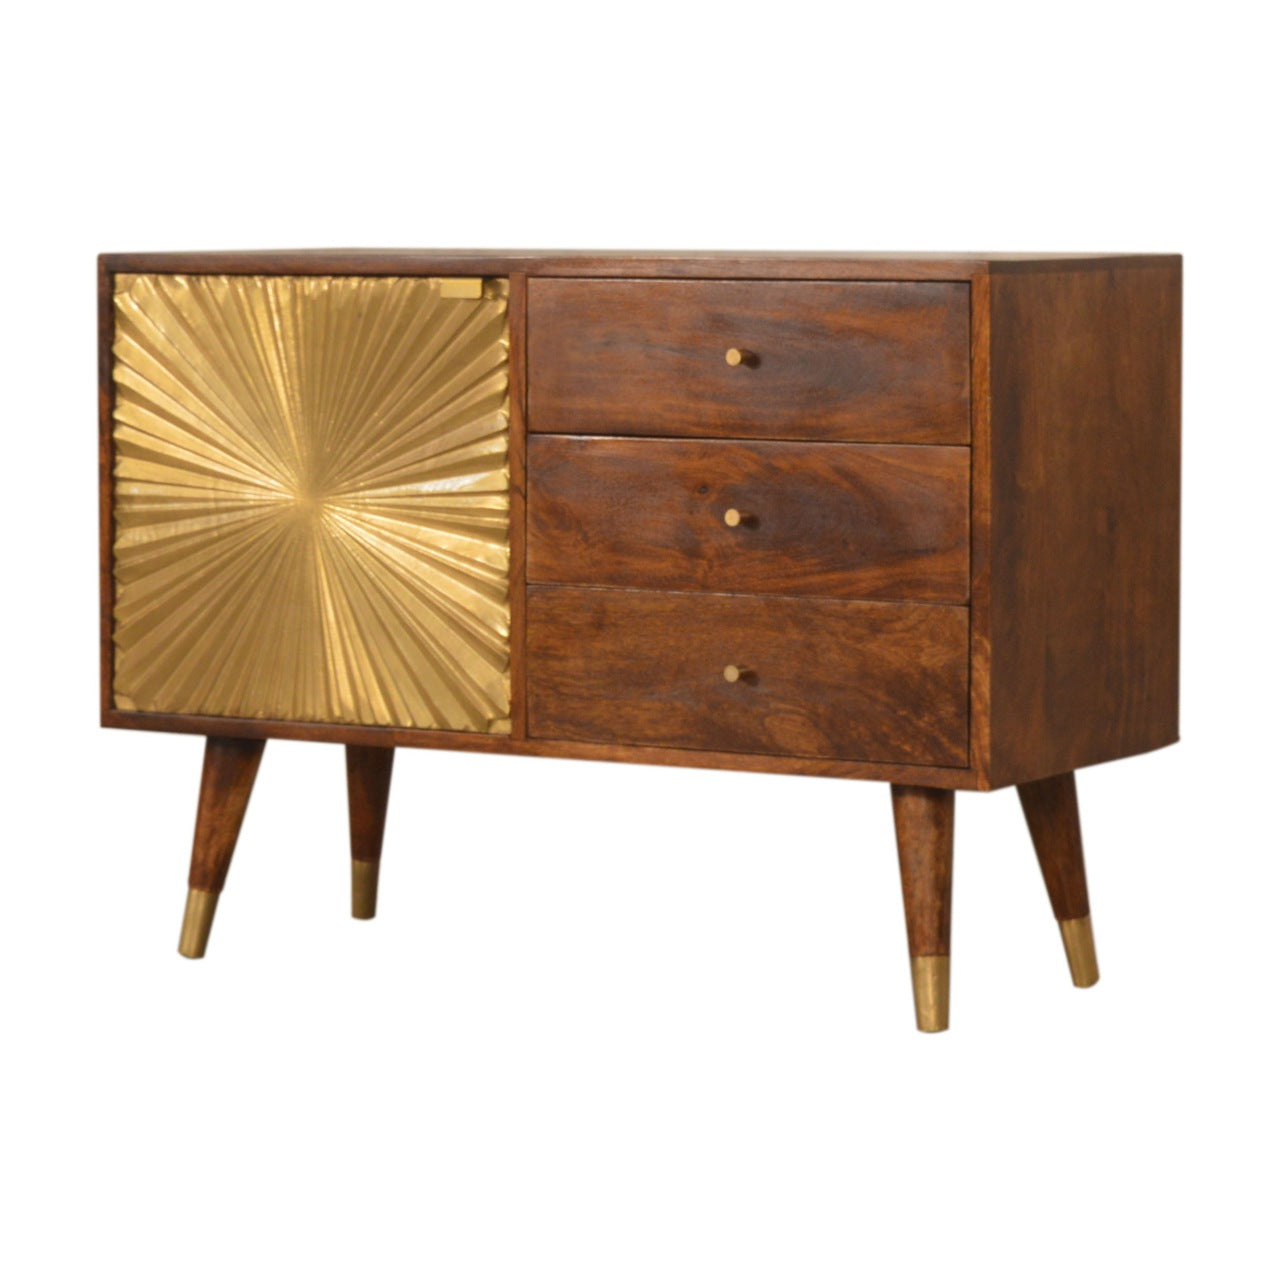 Gold and Wood Mid Century Style Sideboard